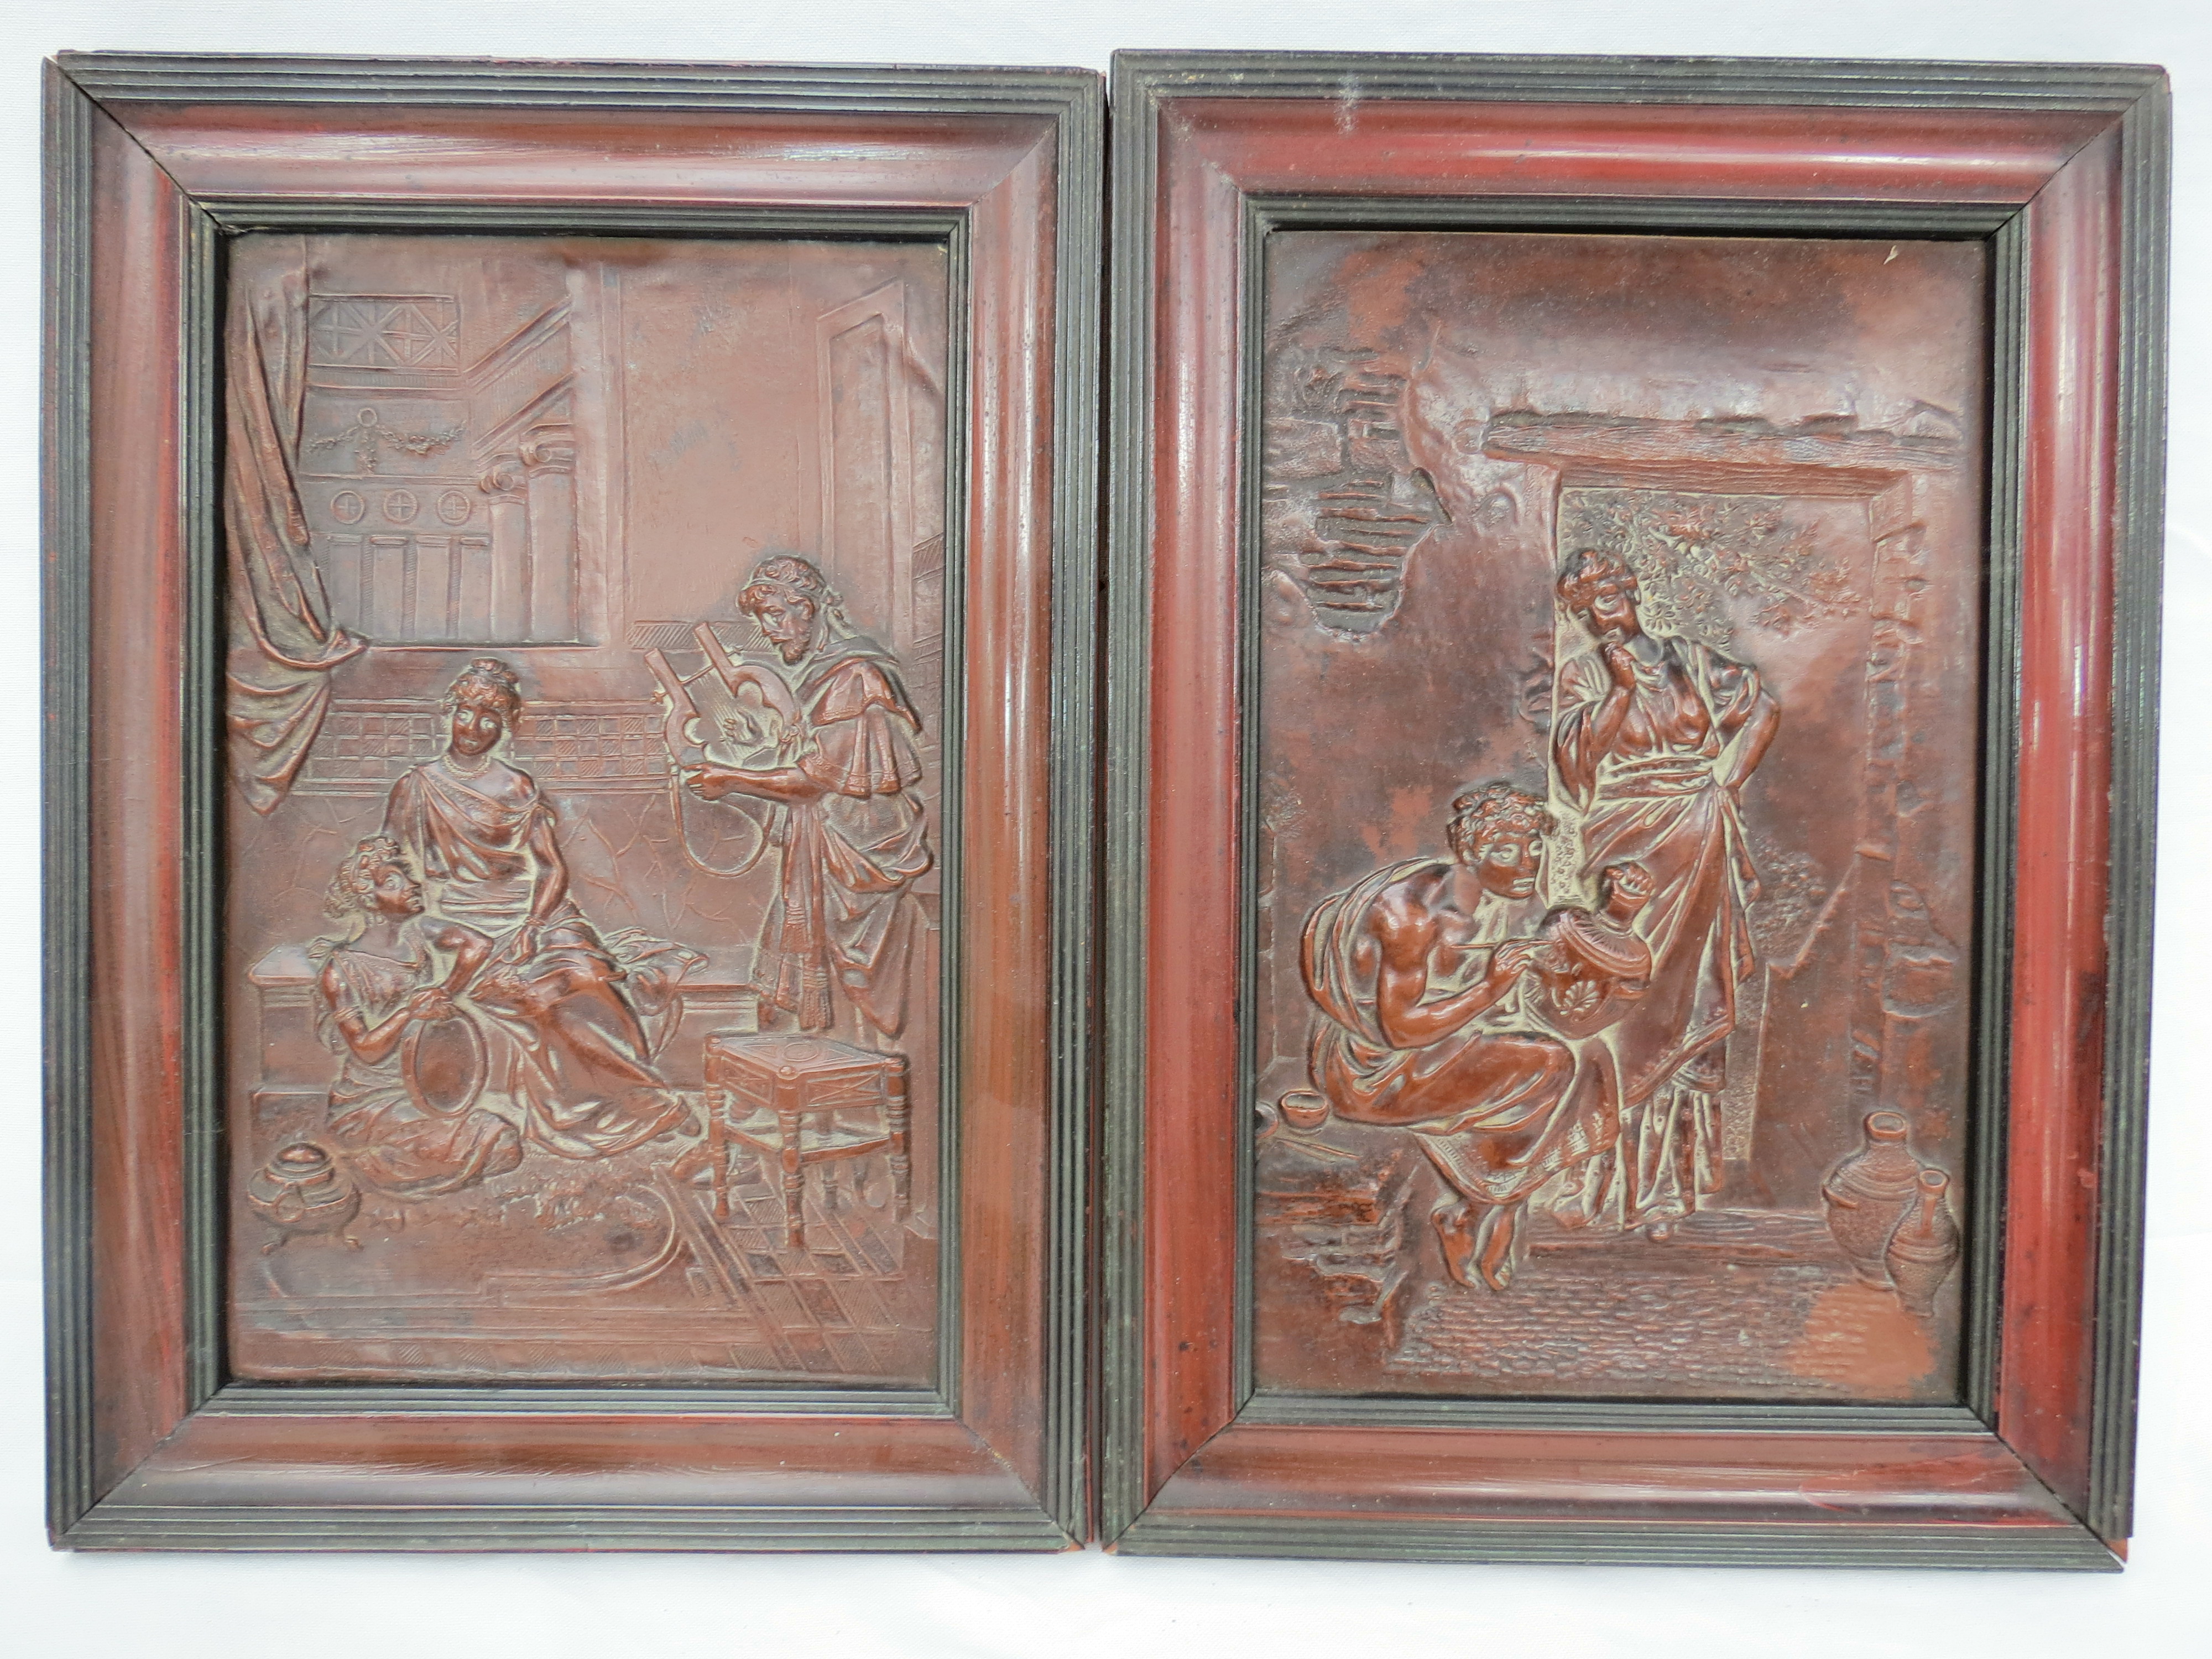 A pair of 19thC embossed and framed copper plaques depicting classical subjects. 24x15.2cm.